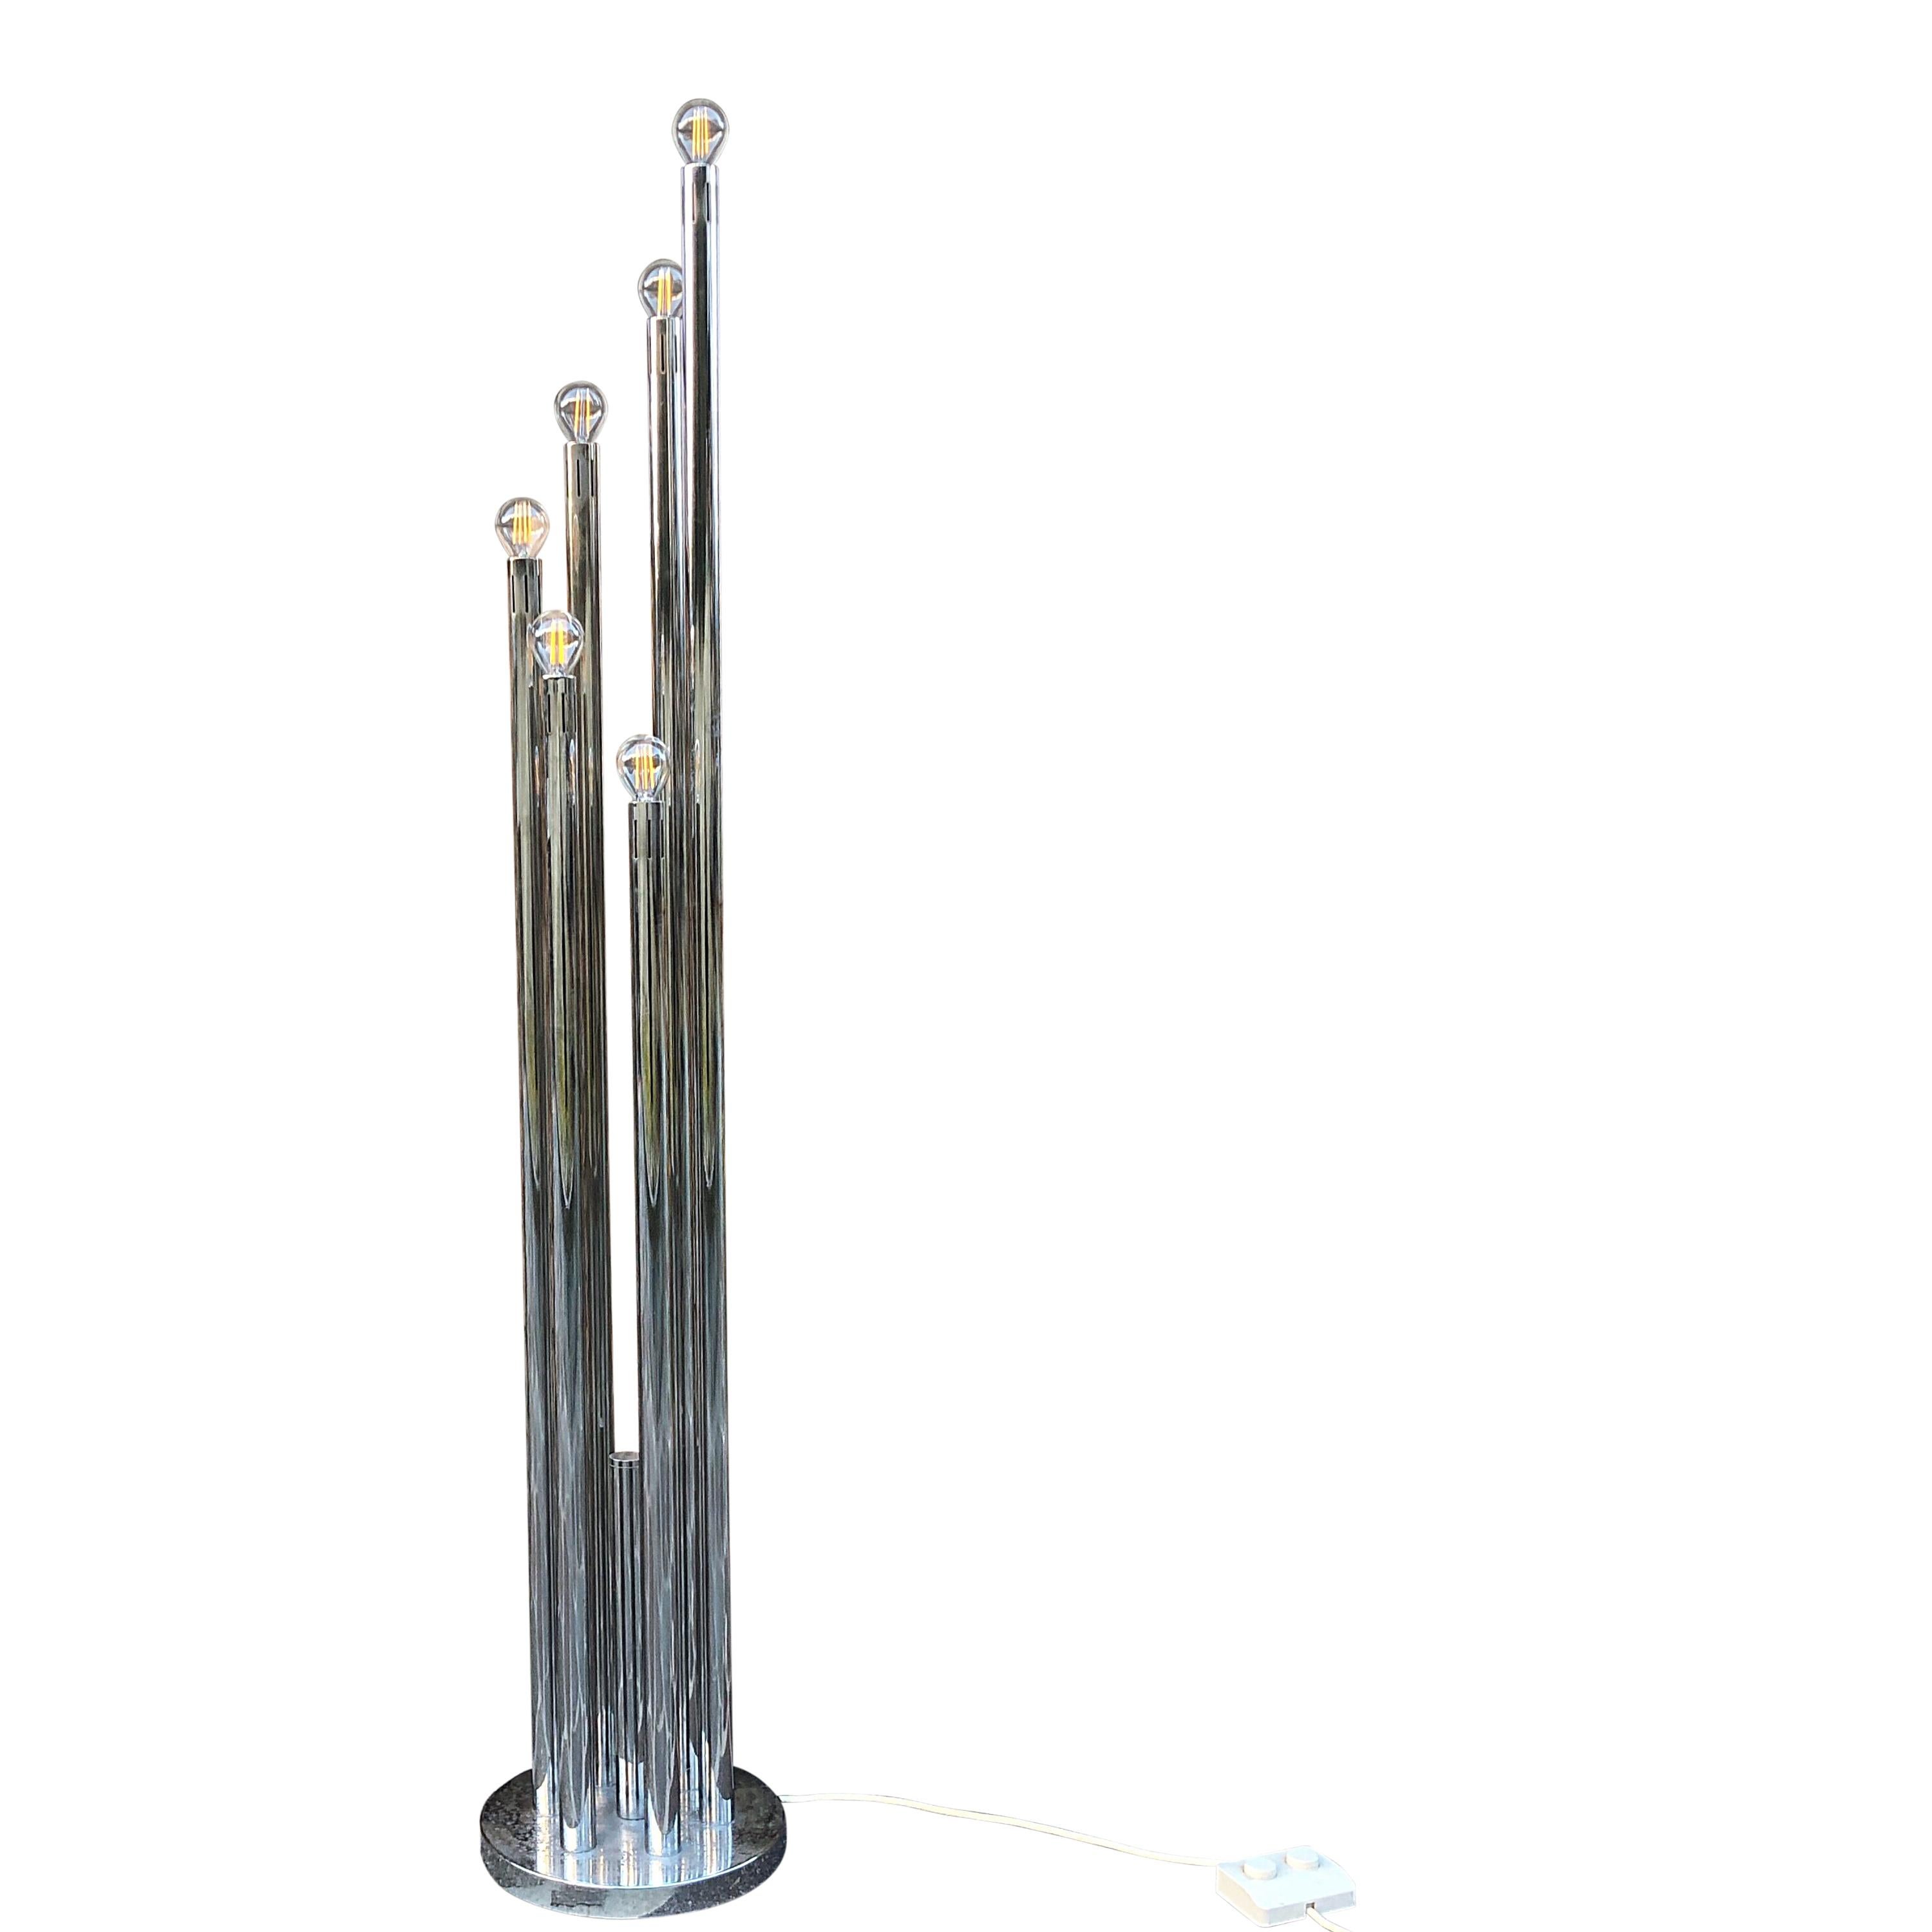 This floor lamp, designed by Goffredo Reggiani and produced by the Italian manufacturer “Reggiani Illuminazione” in the 60s, is the perfect choice to light up your Space Age living room.

Chrome tubular pipes are ascending and descending like organ